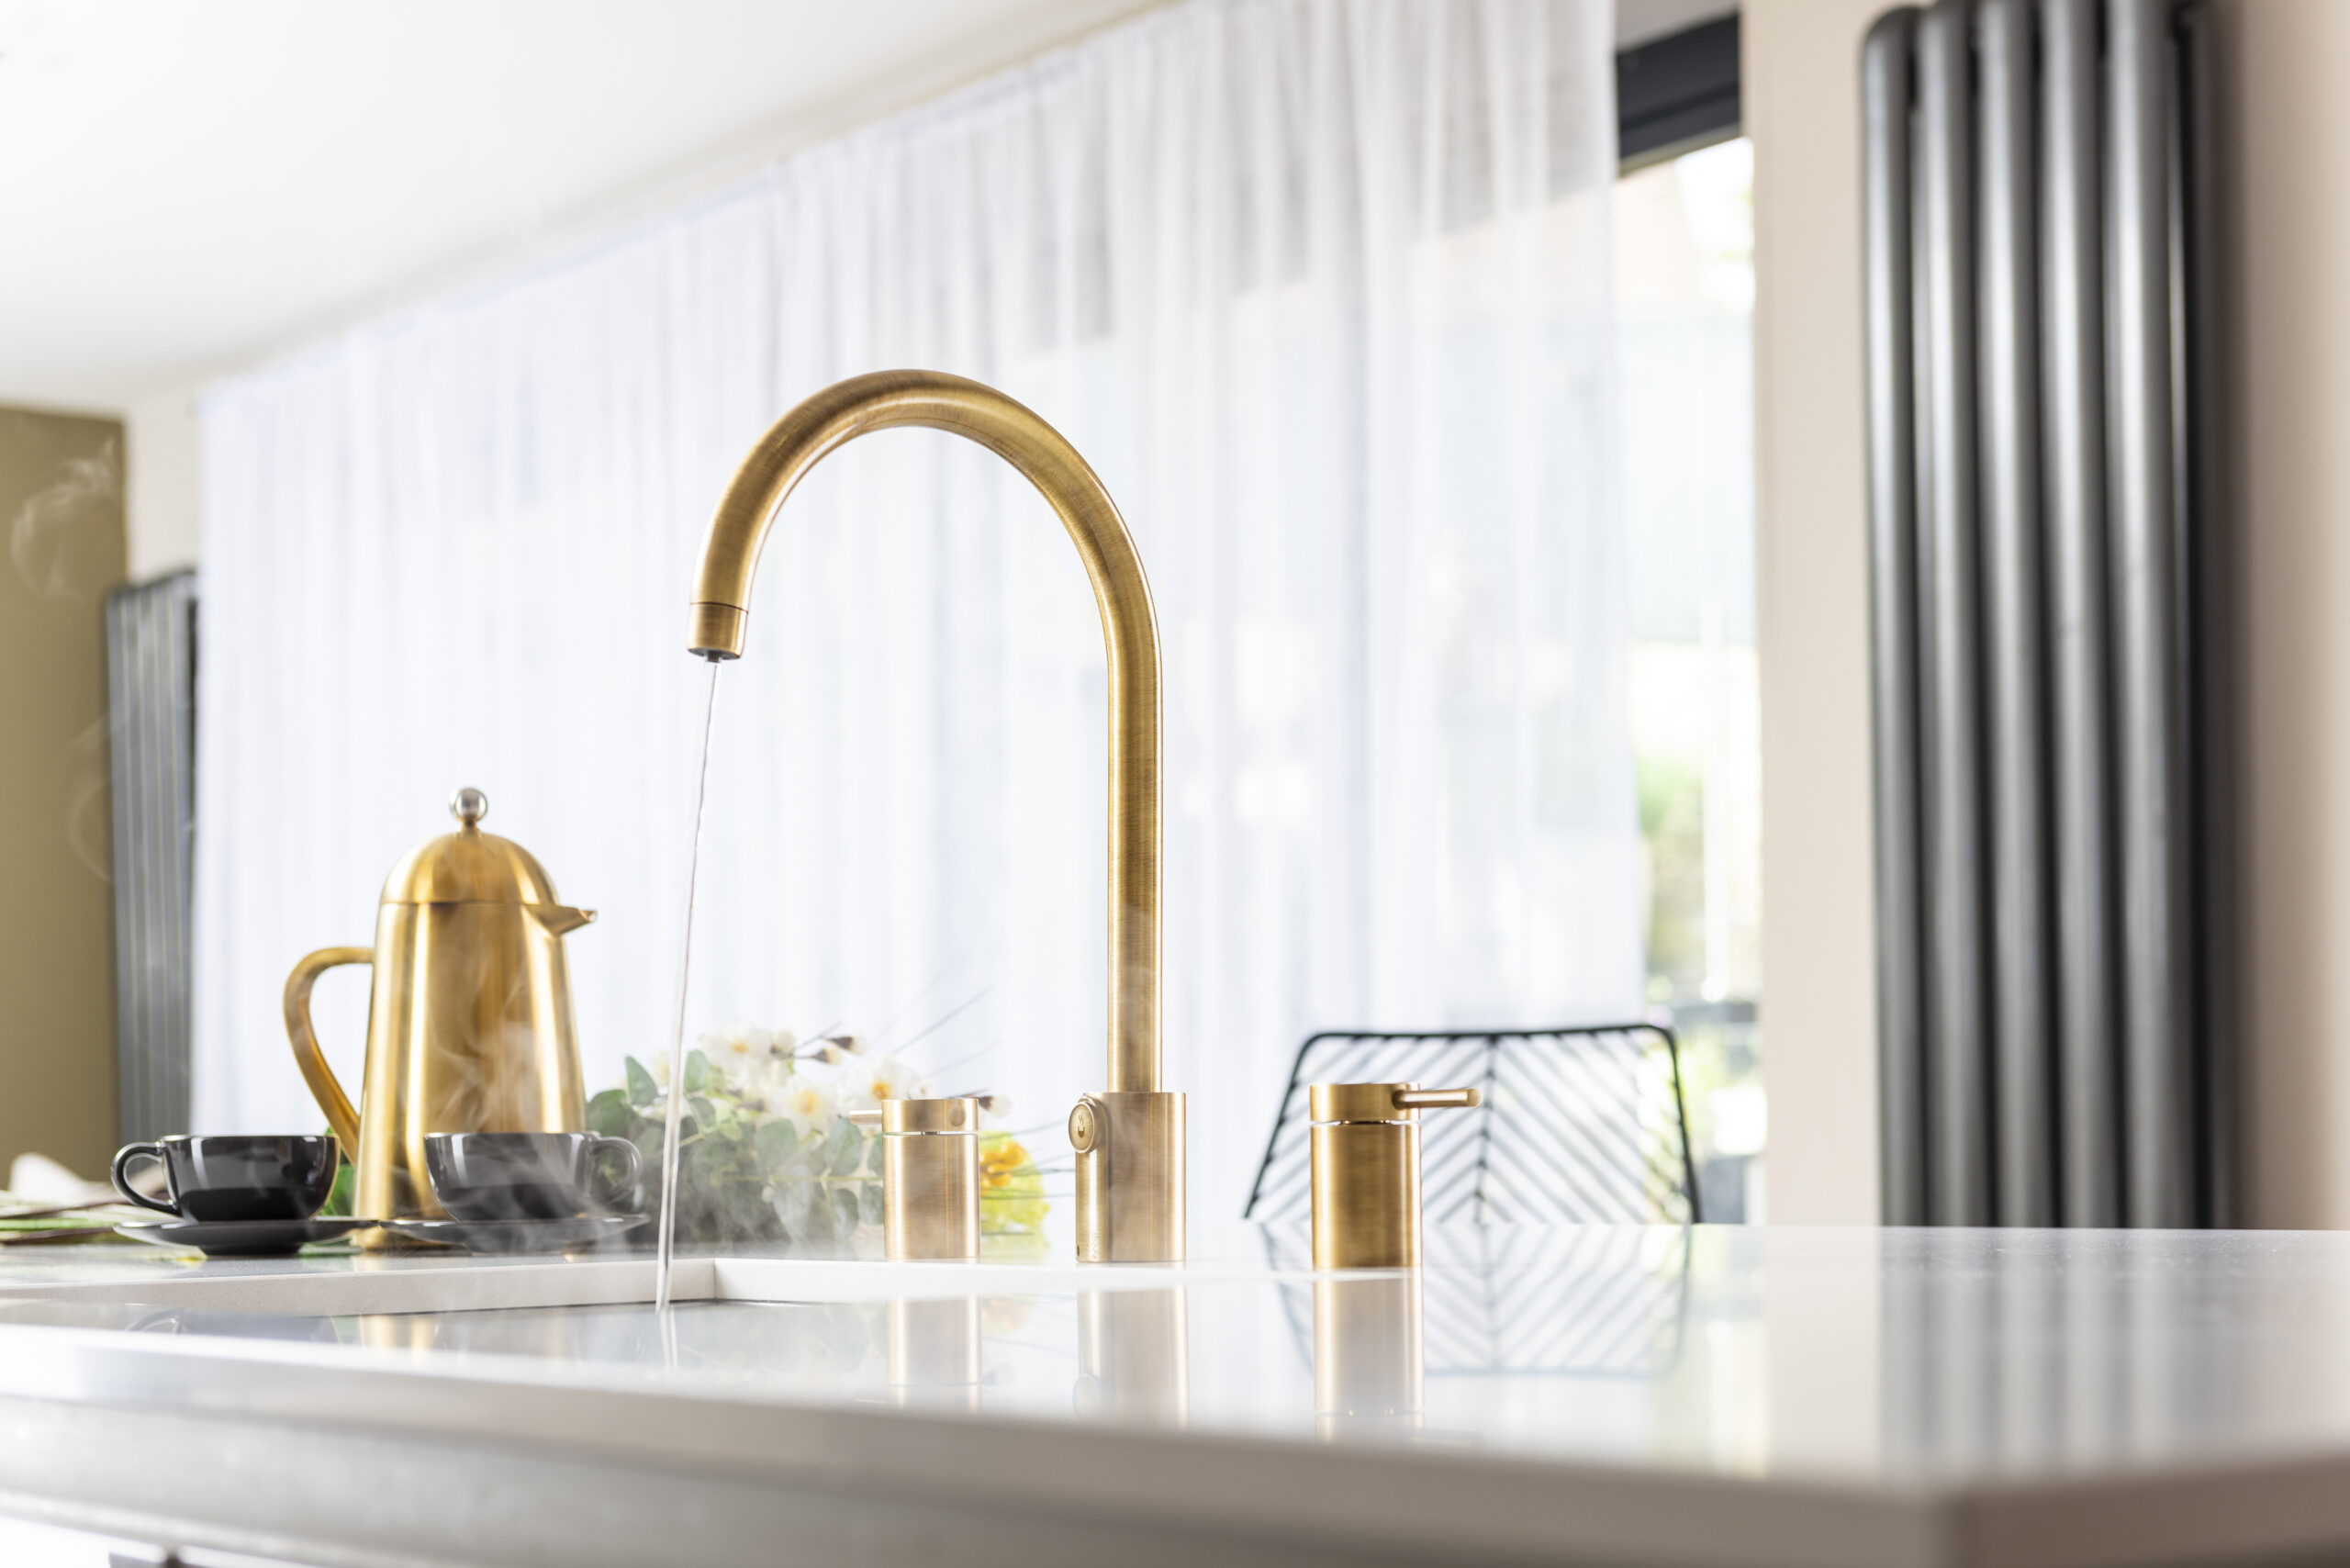 Pronteau instant hot water taps for every Abode